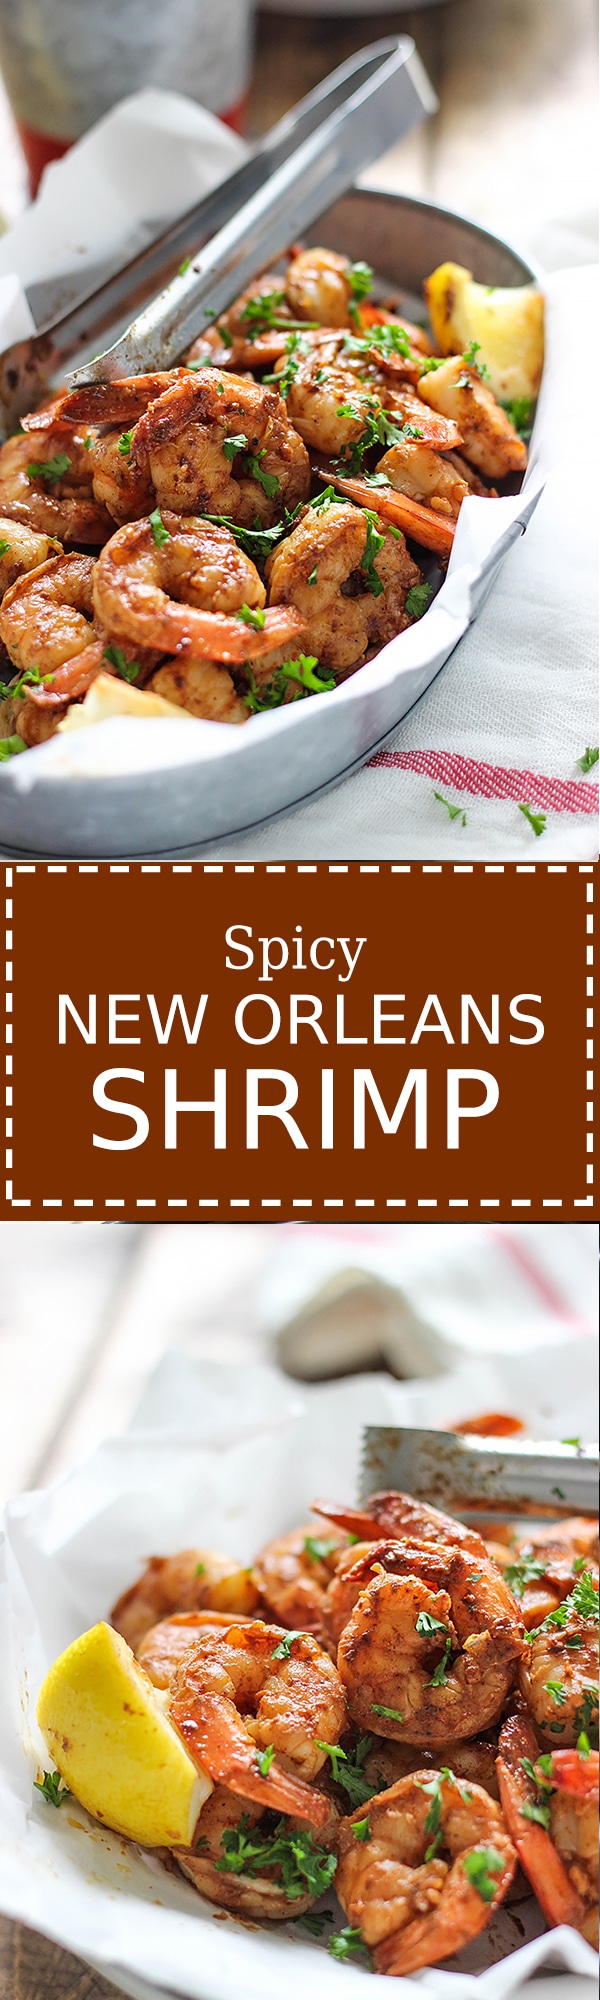 Want a fiery and hot 15 minute shrimp recipe? This spicy New Orleans-style shrimp does the trick!